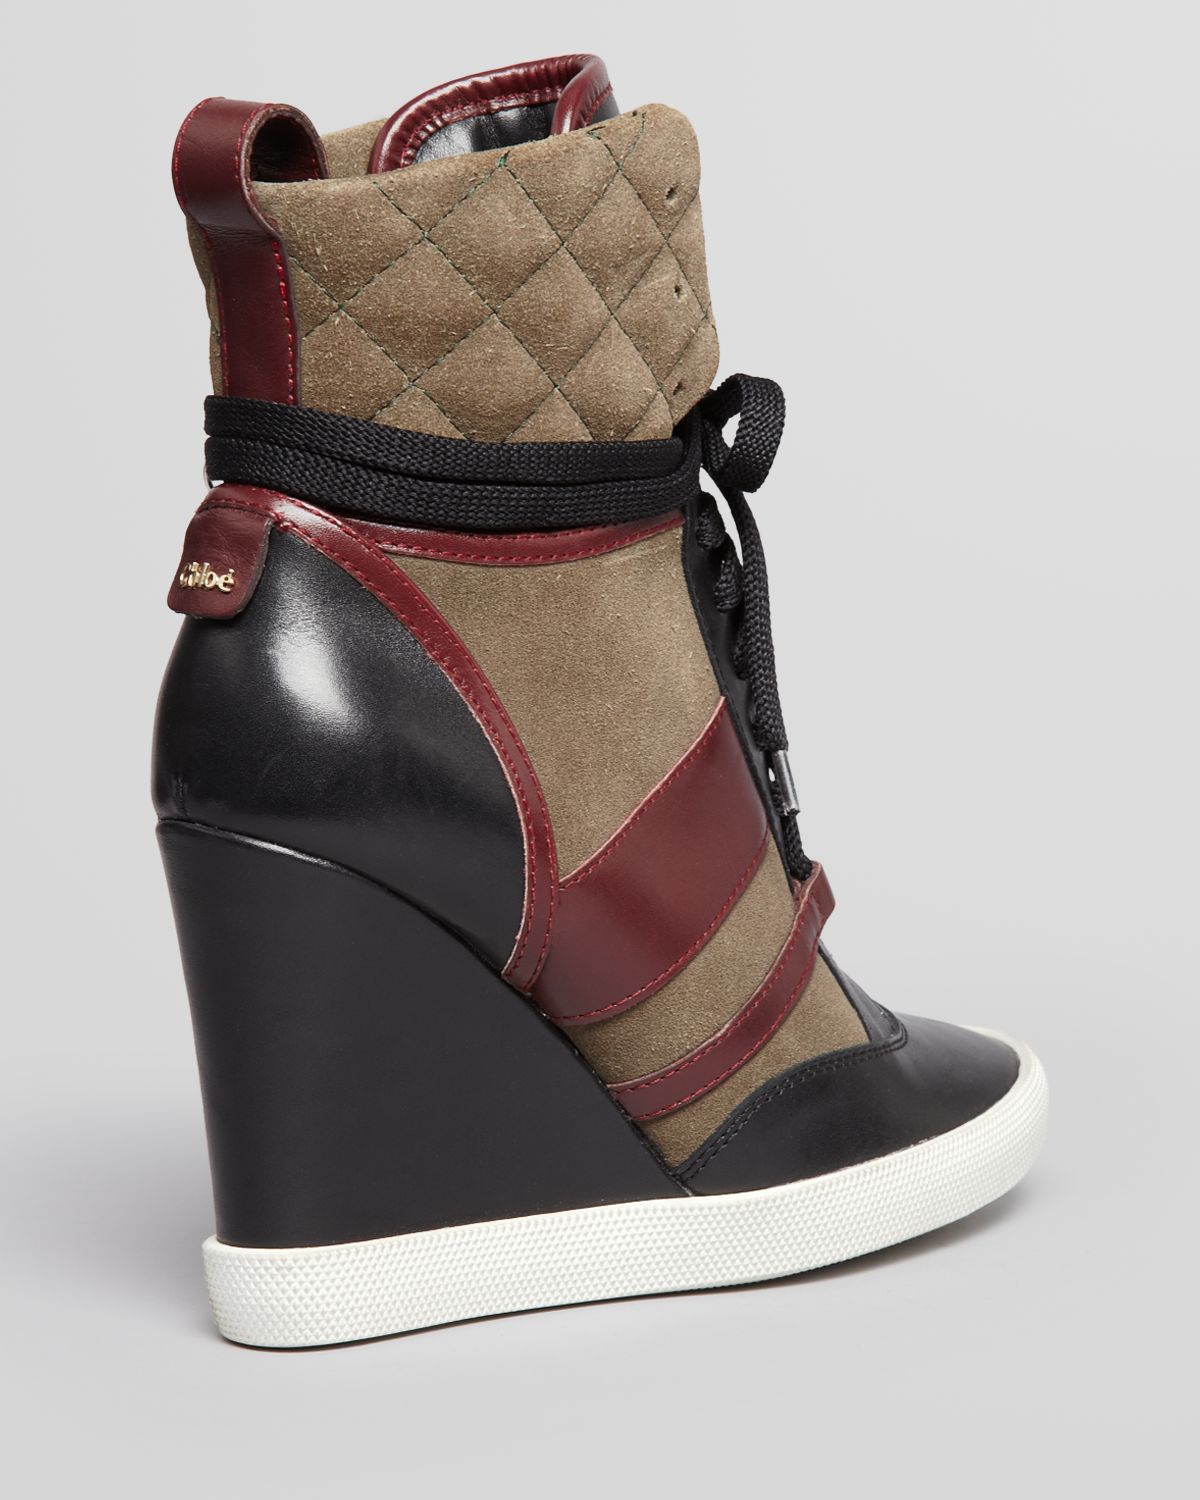 What’s the best way to wear wedge sneakers?